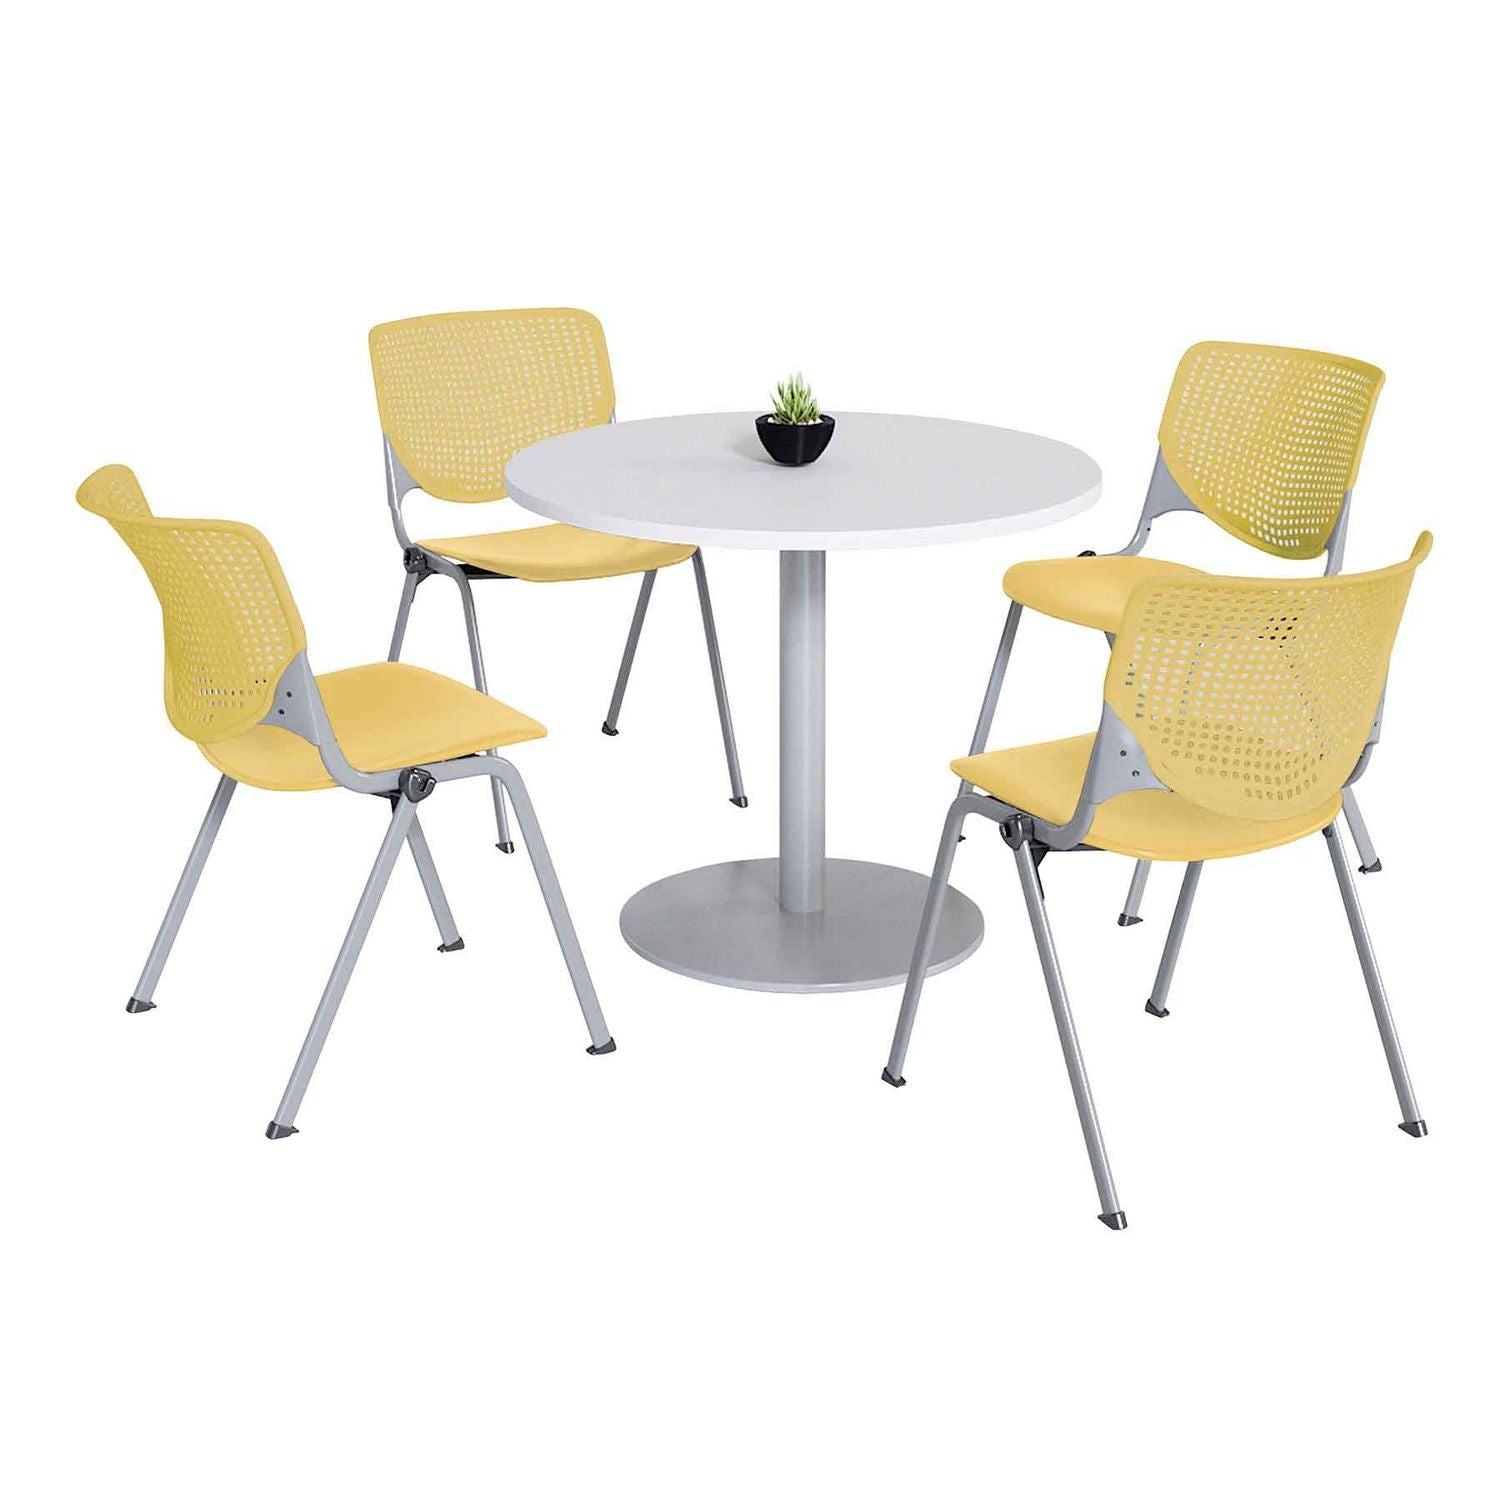 pedestal-table-with-four-yellow-kool-series-chairs-round-36-dia-x-29h-designer-white-ships-in-4-6-business-days_kfi811774036702 - 1